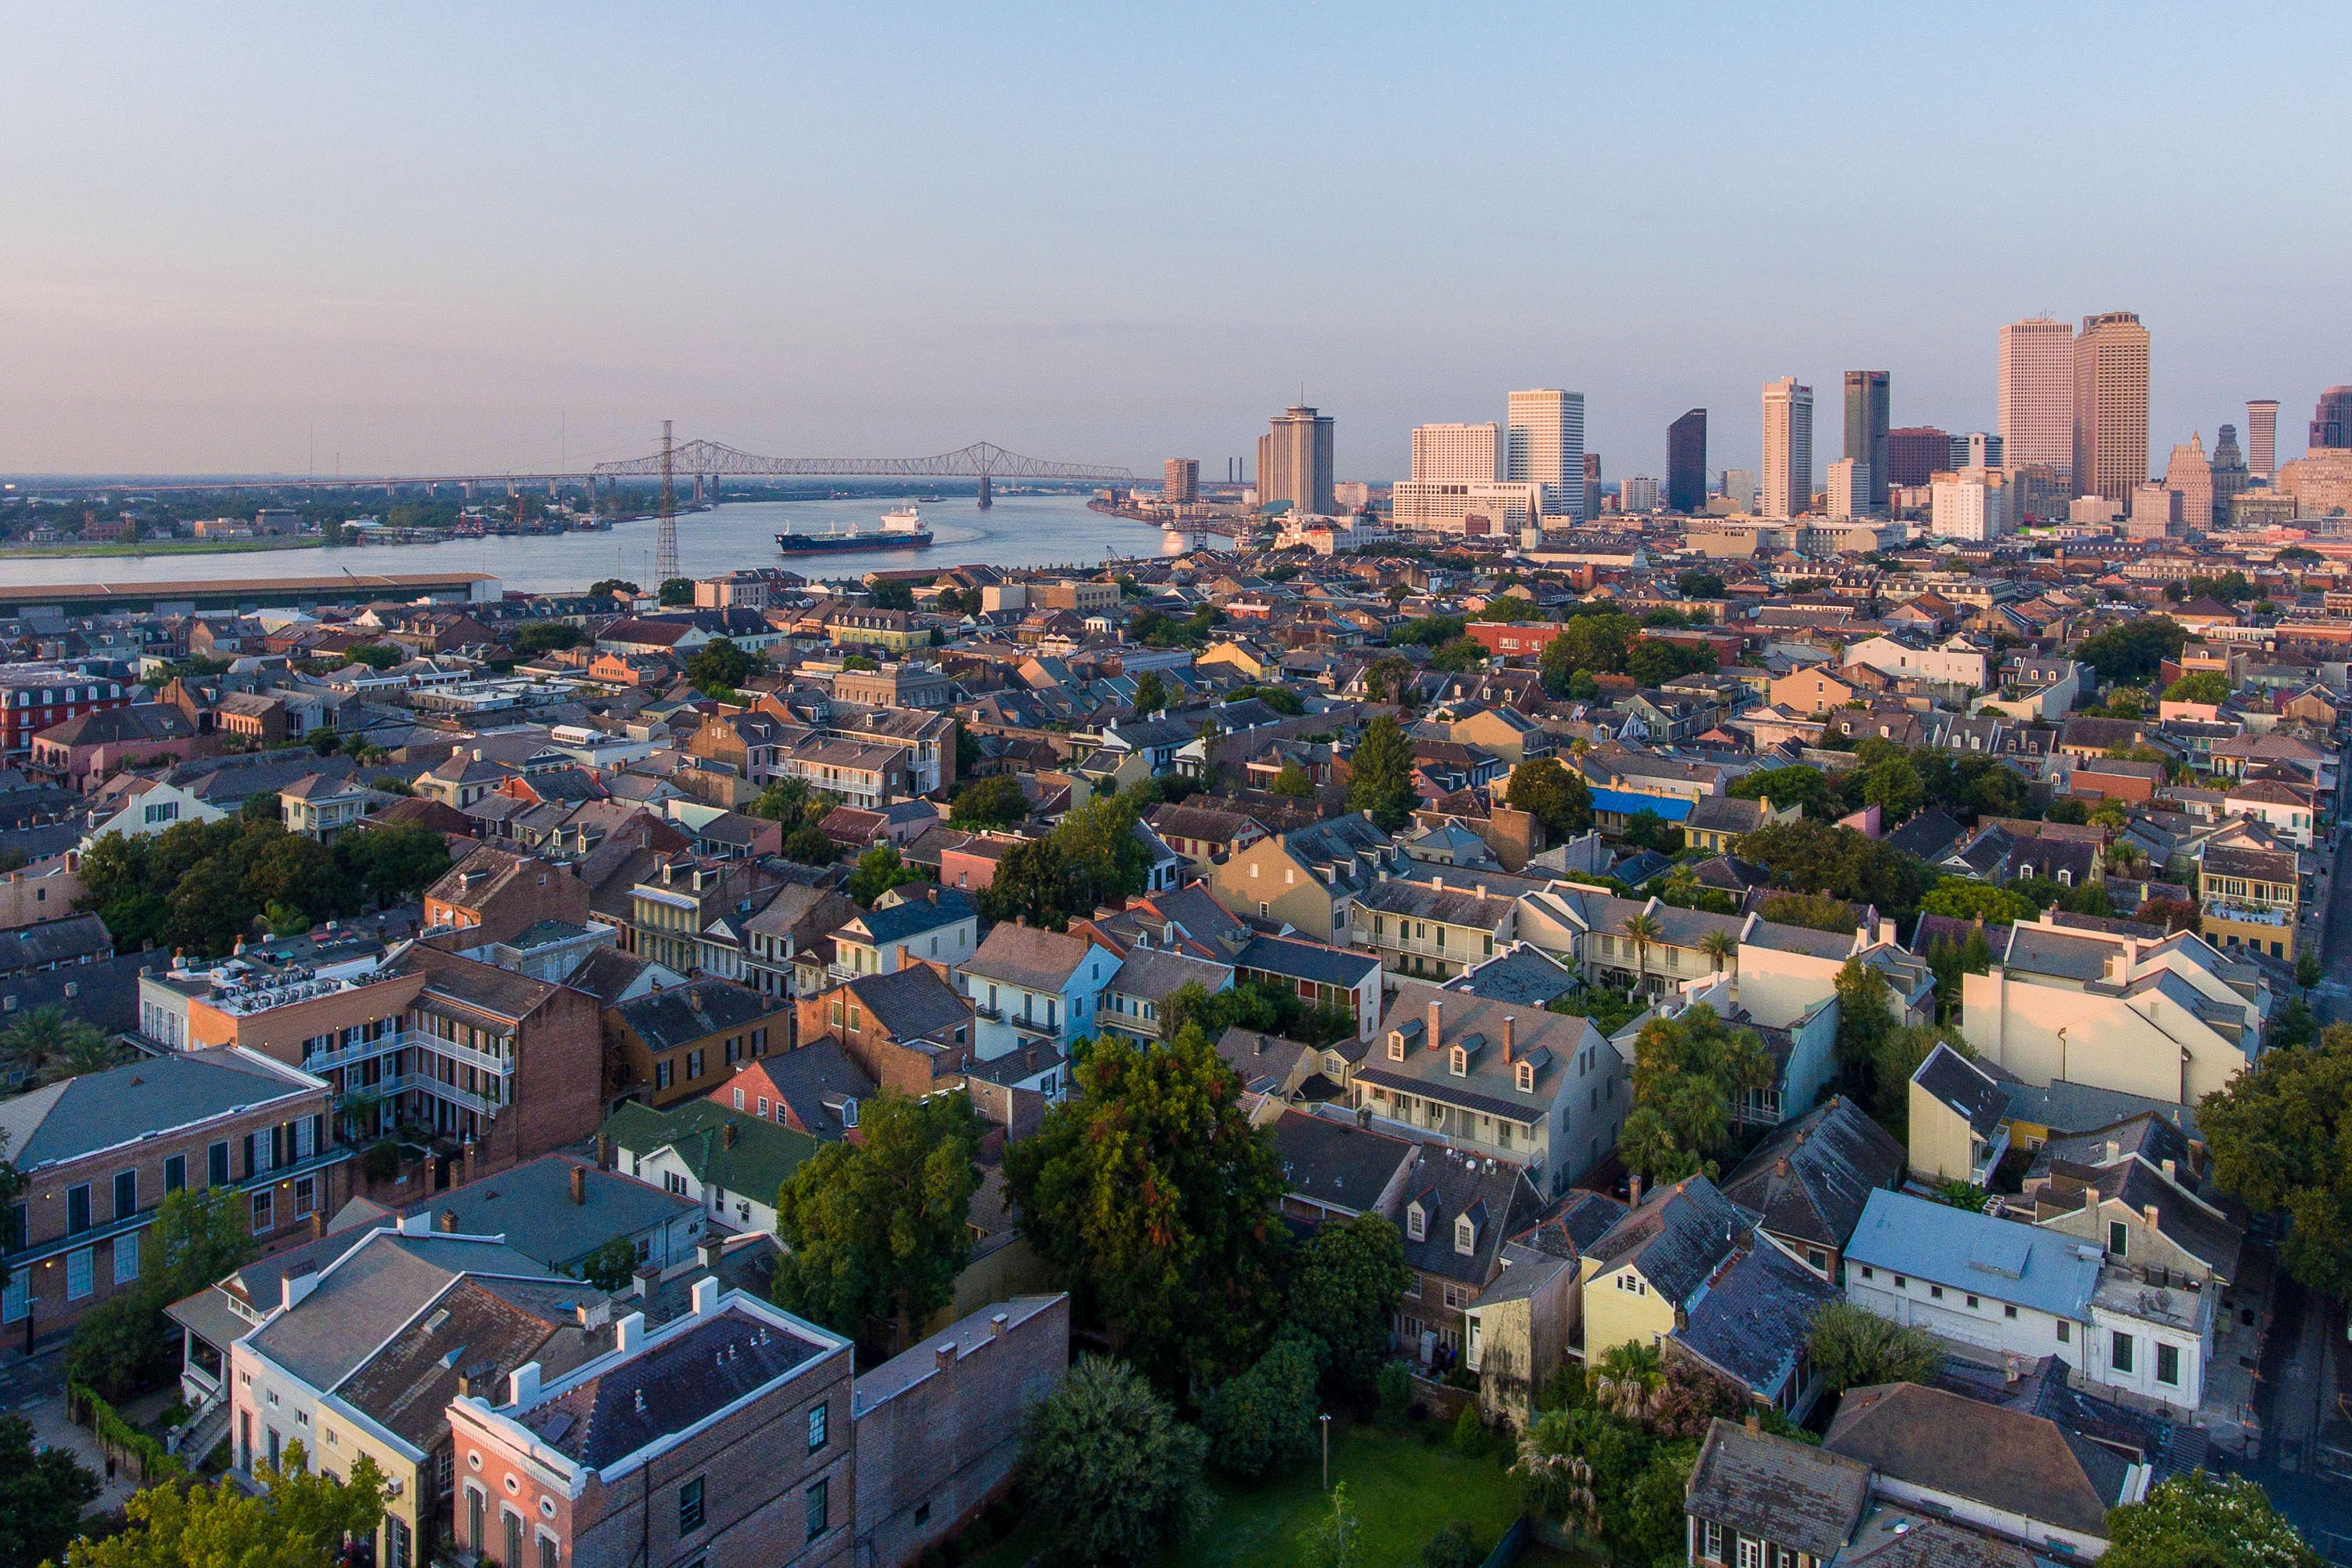 City view of New Orleans